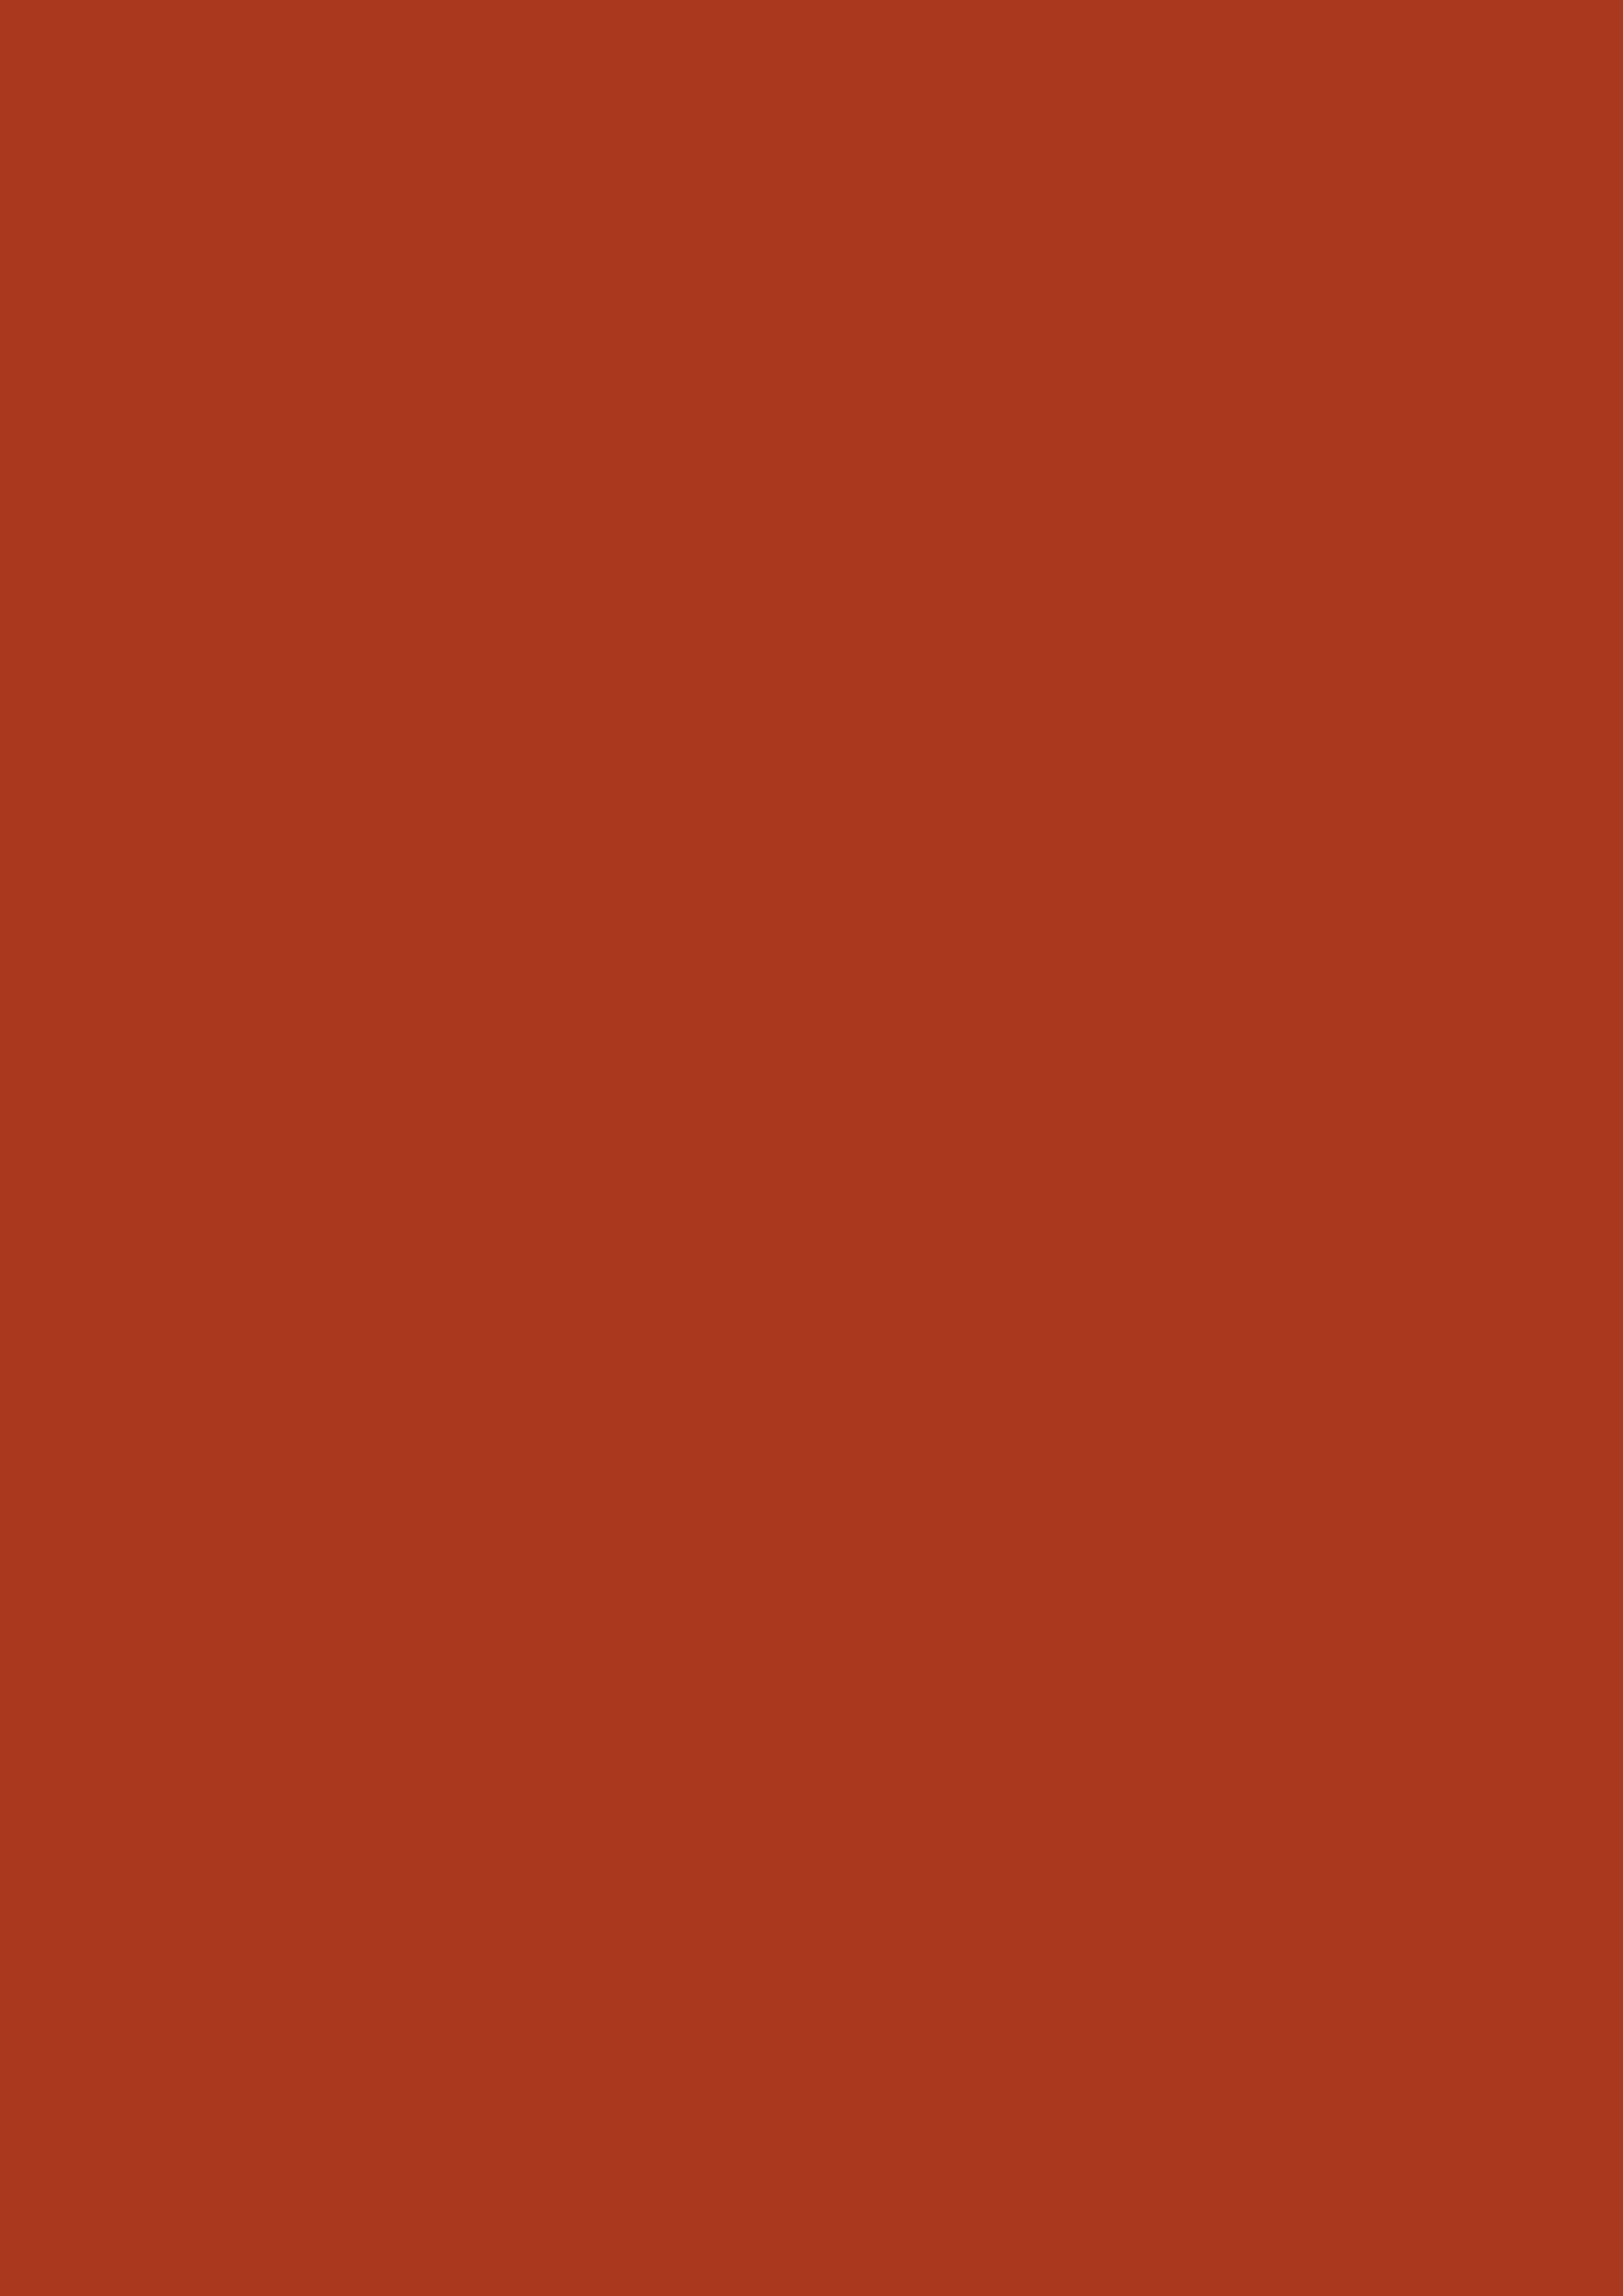 2480x3508 Chinese Red Solid Color Background